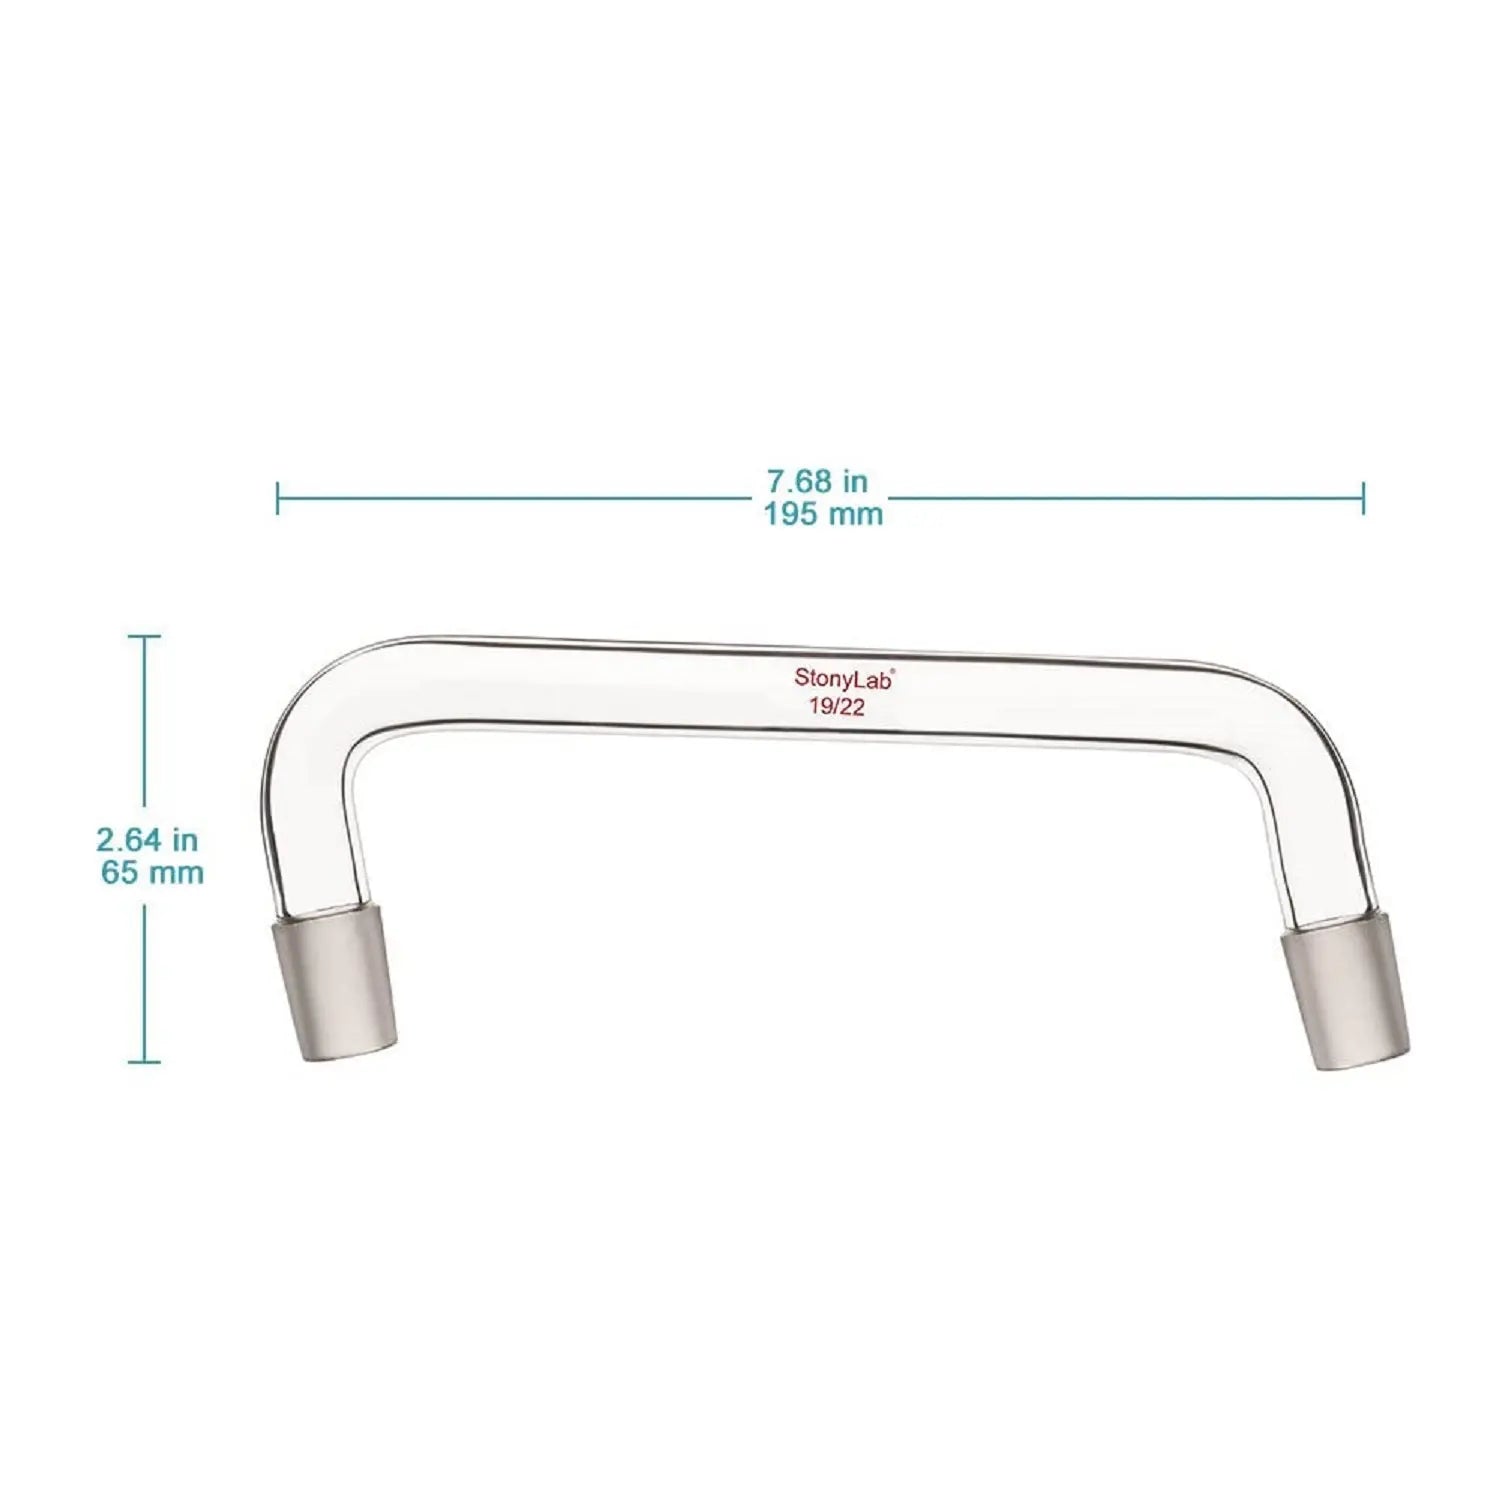 Glass Distilling Adapter with 75 Degree and 105 Degree Bent Adapters - Distilling